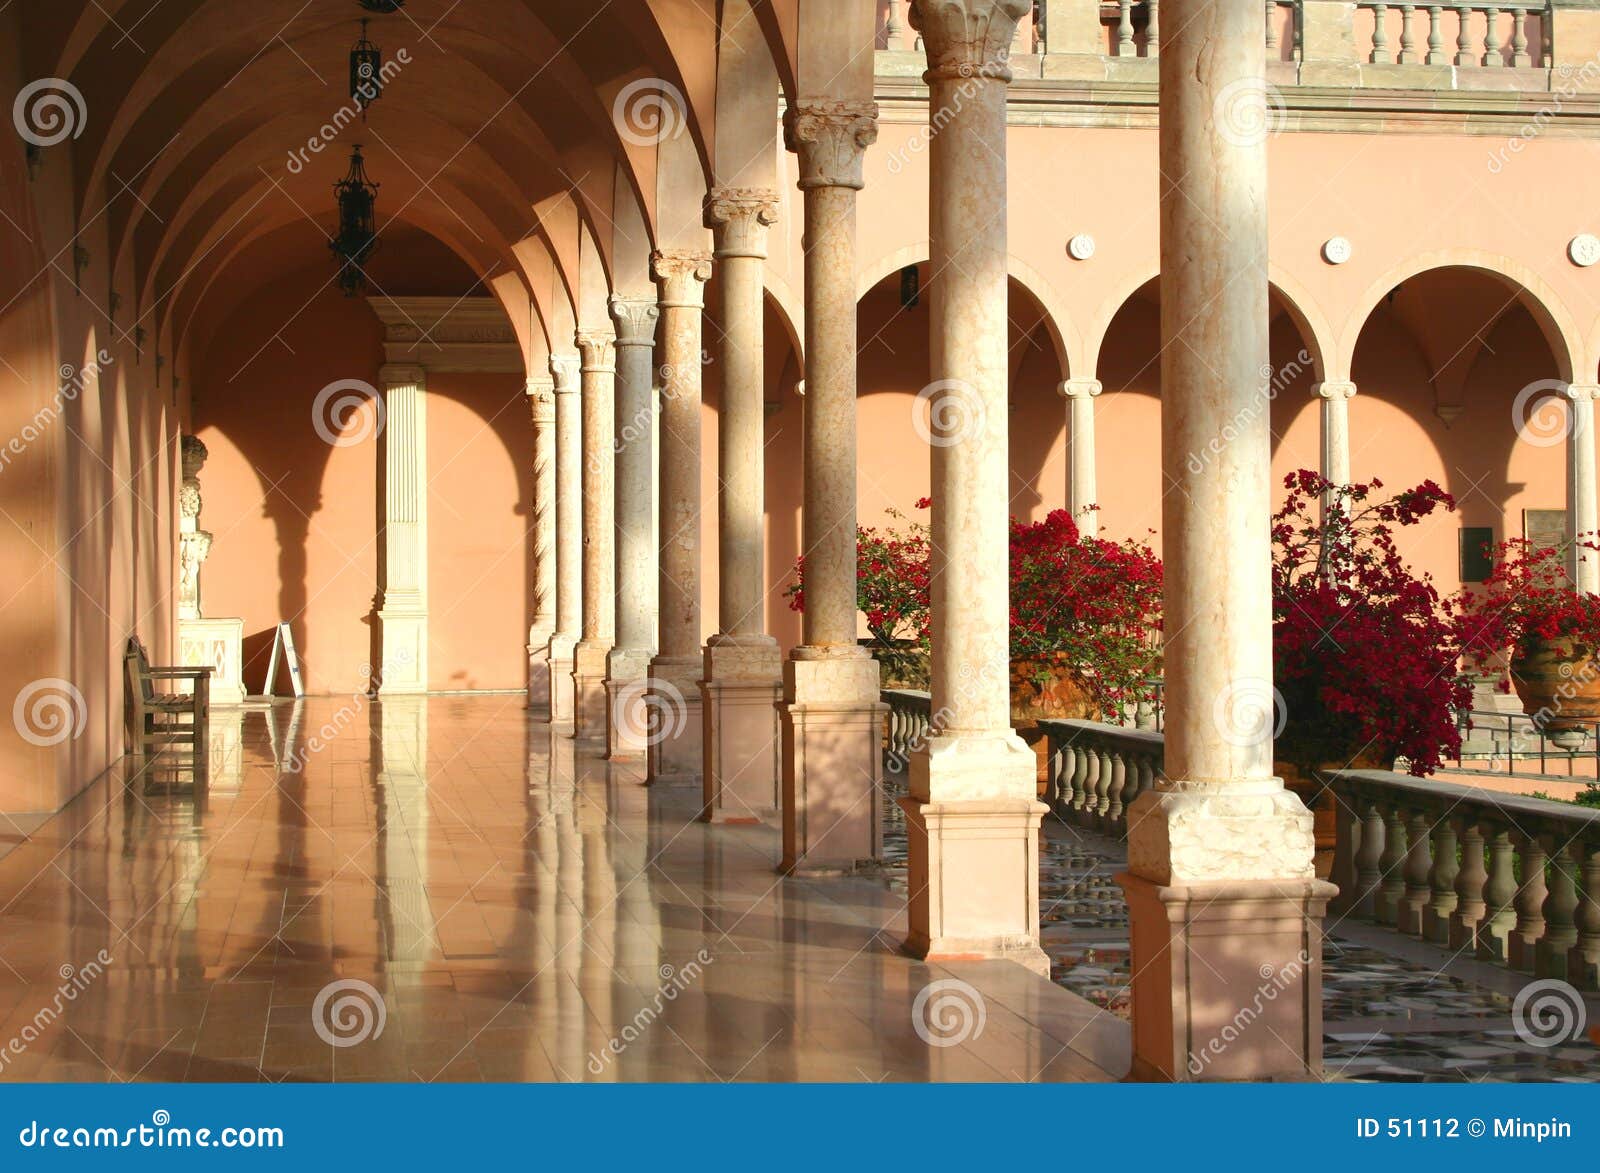 arches and columns of southern mansion